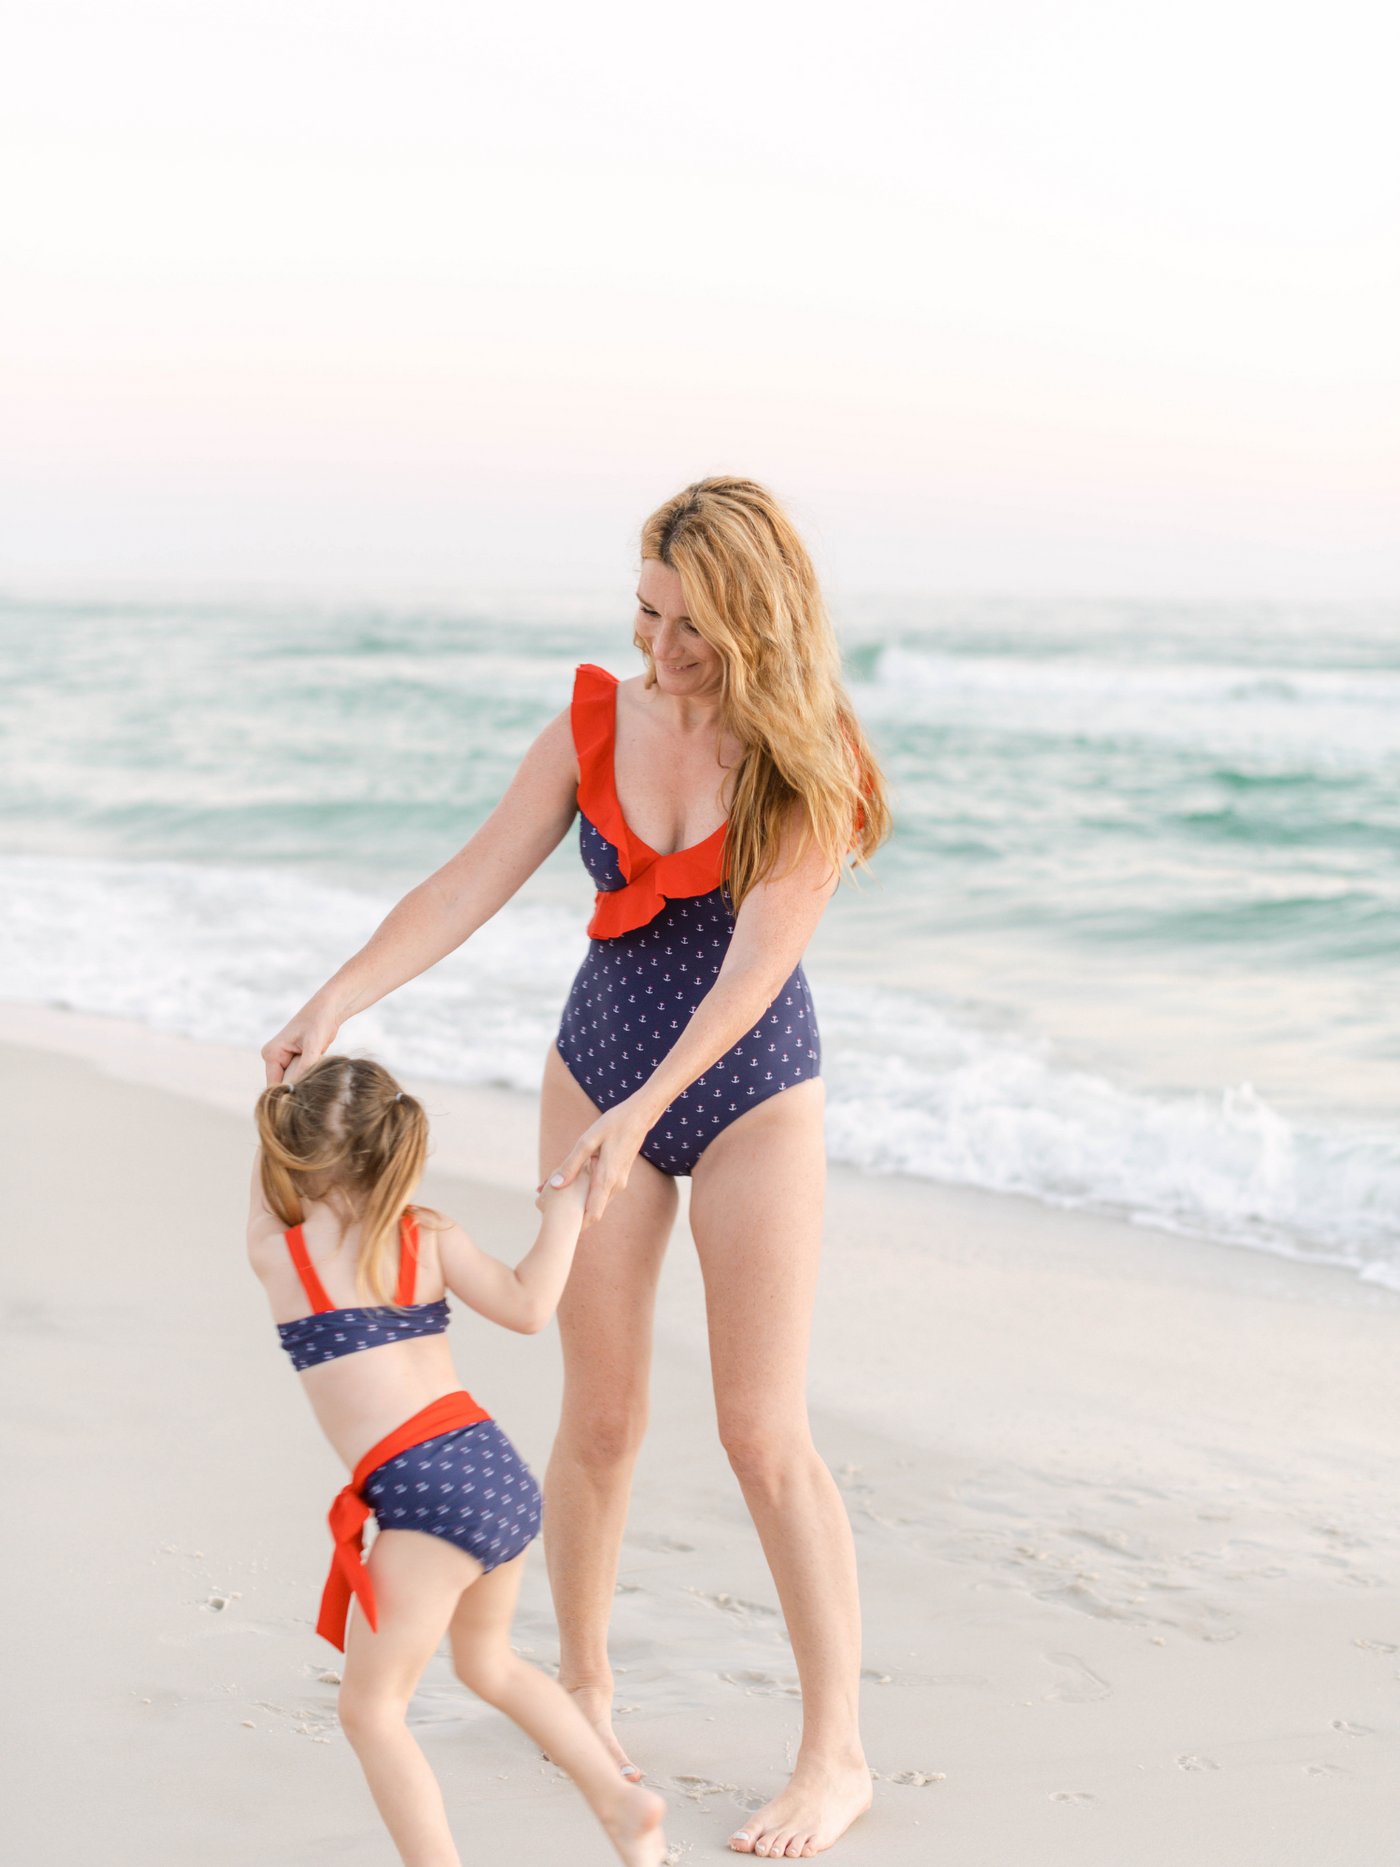 Navalora Matching Swimsuits Mommy and Me Girl's Anchors Aweigh Red White and Blue Bikini Set Swimsuit